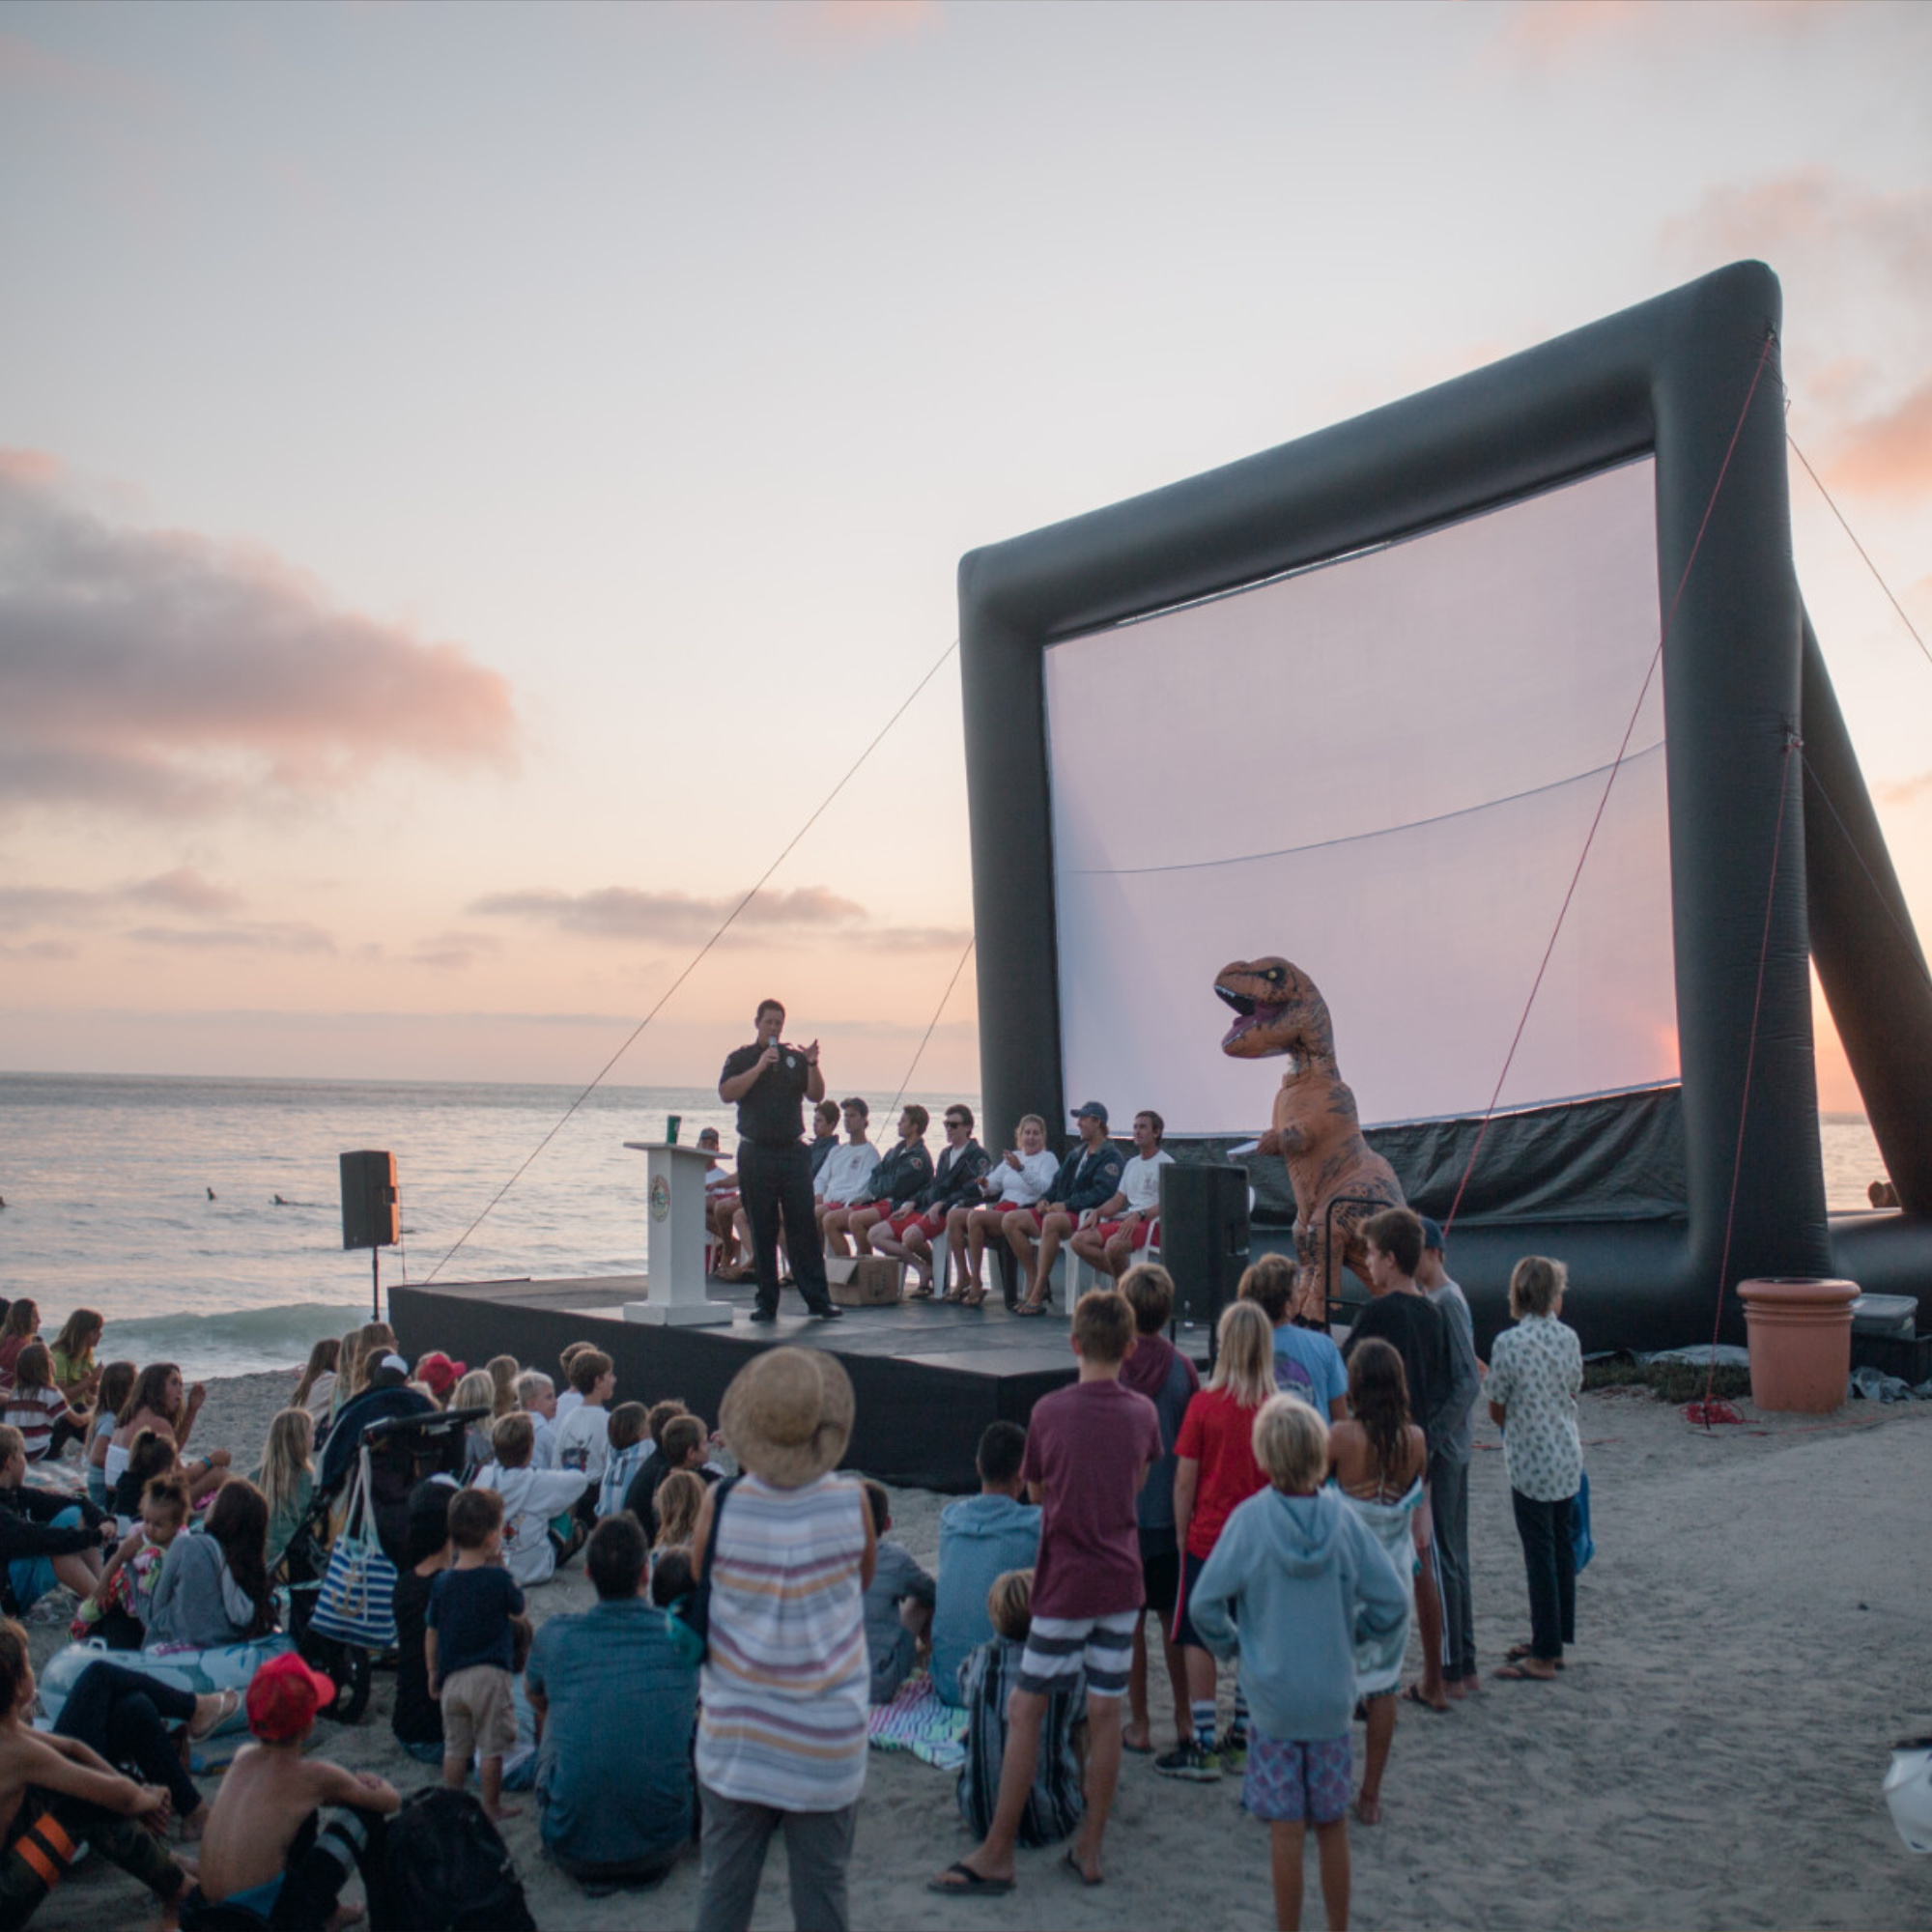 Parks & Rec inflatable movie screen party on the beach